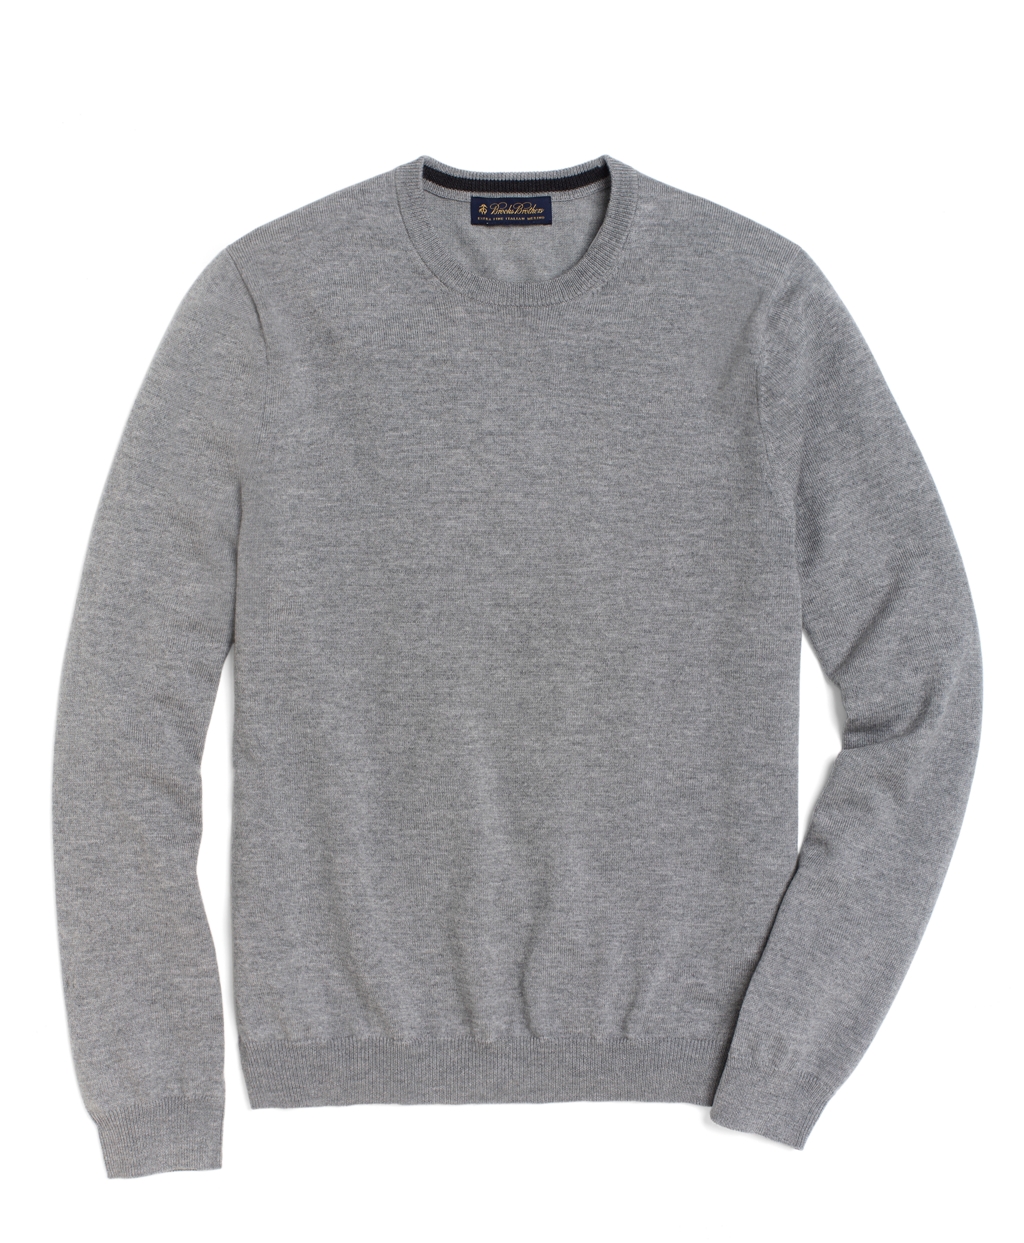 Lyst - Brooks brothers Merino Crew Neck Sweater in Gray for Men